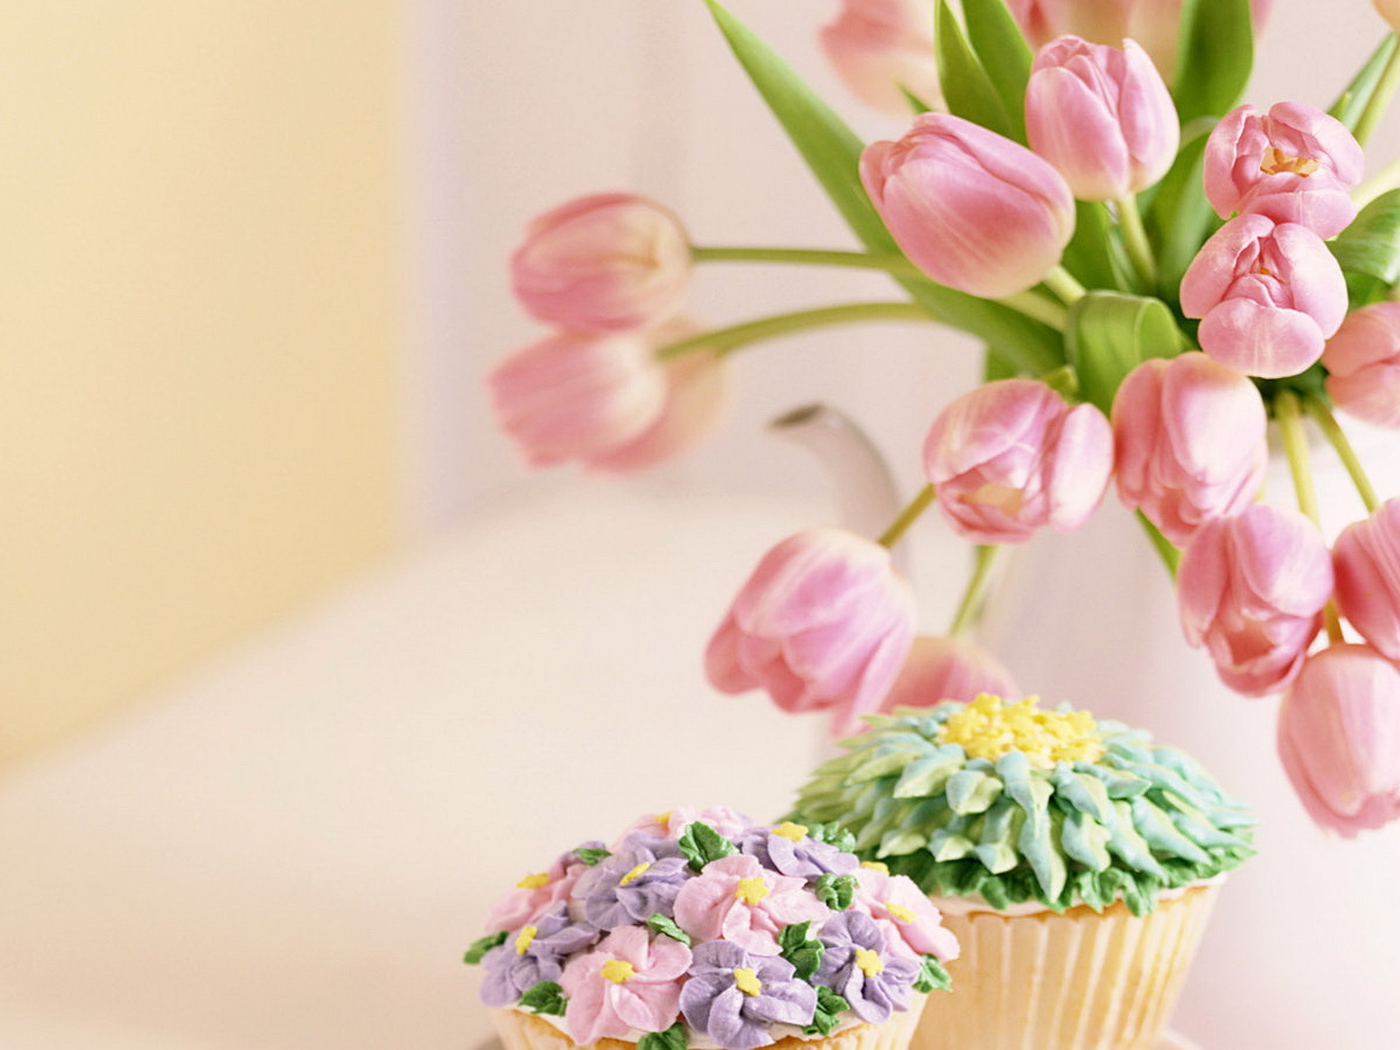 Tulips and cakes